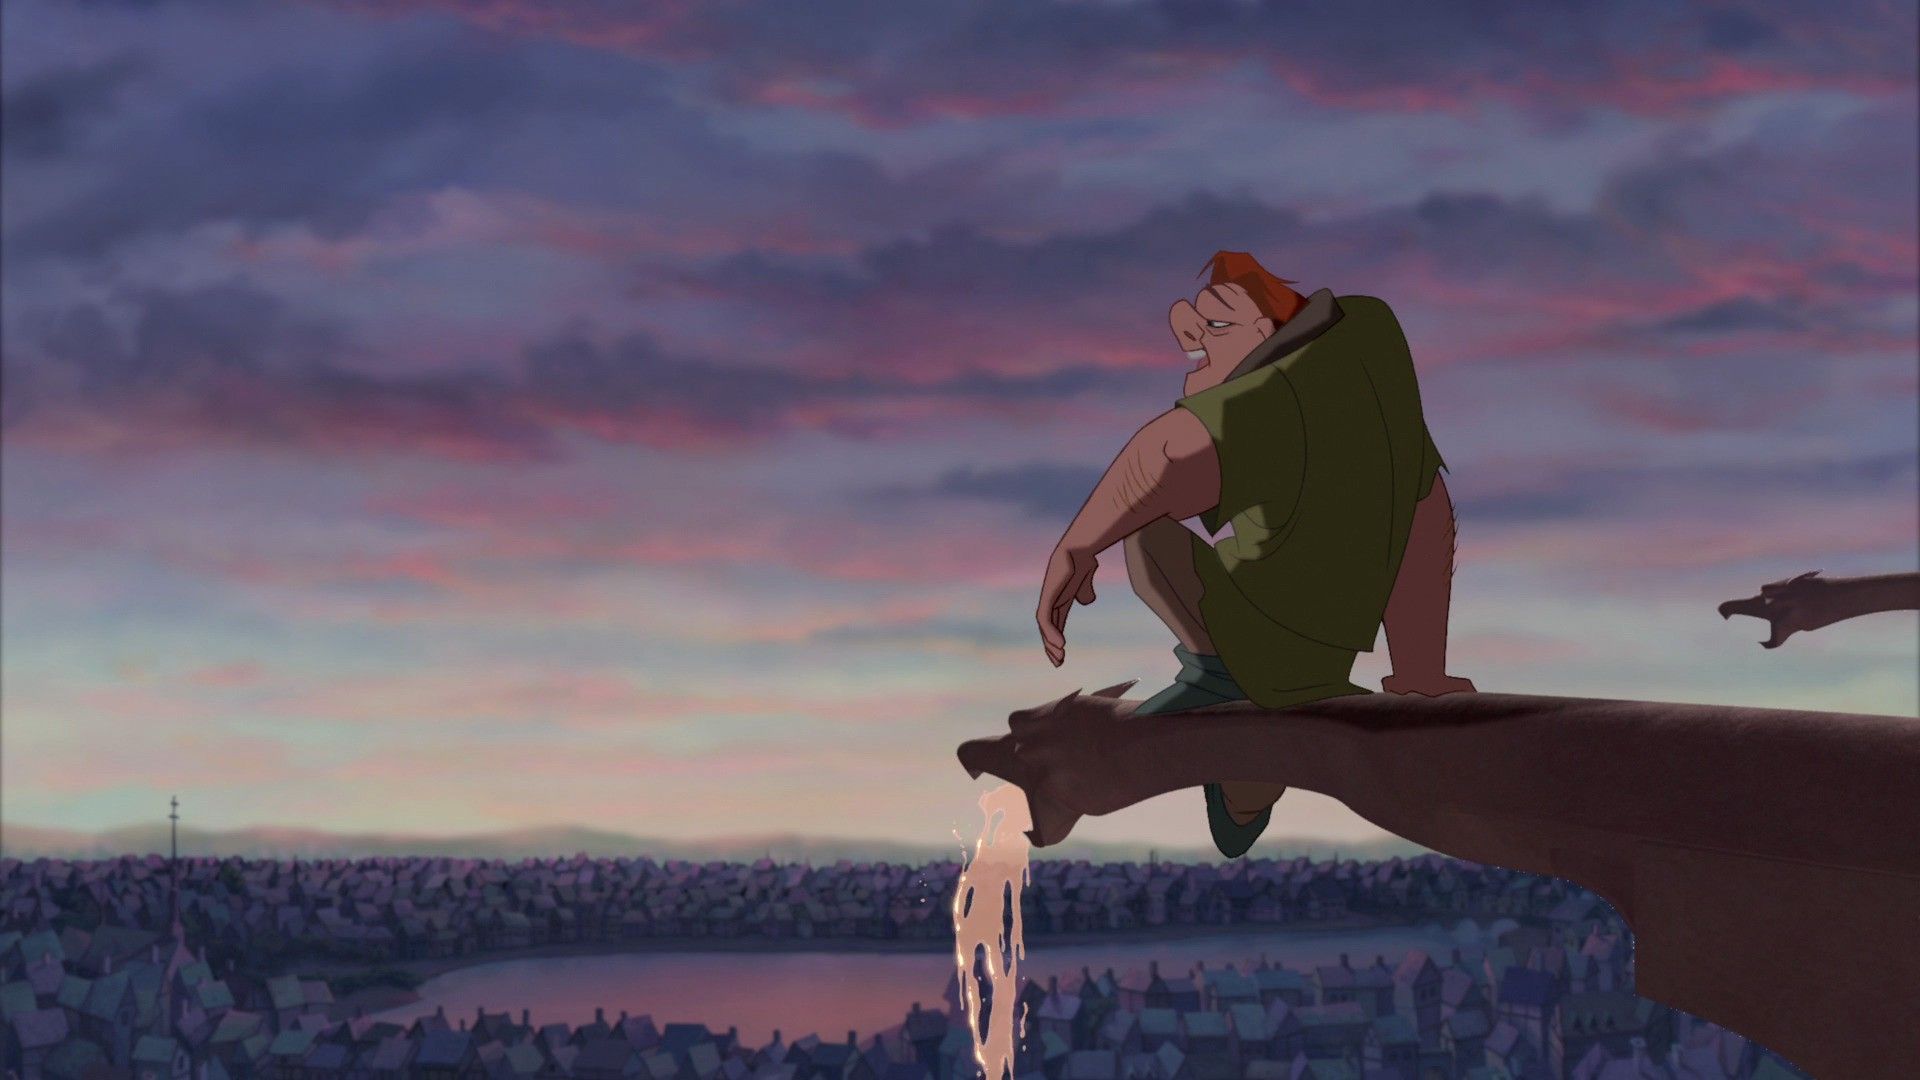 Why 'The Hunchback of Notre Dame' is one of Disney's greatest films.